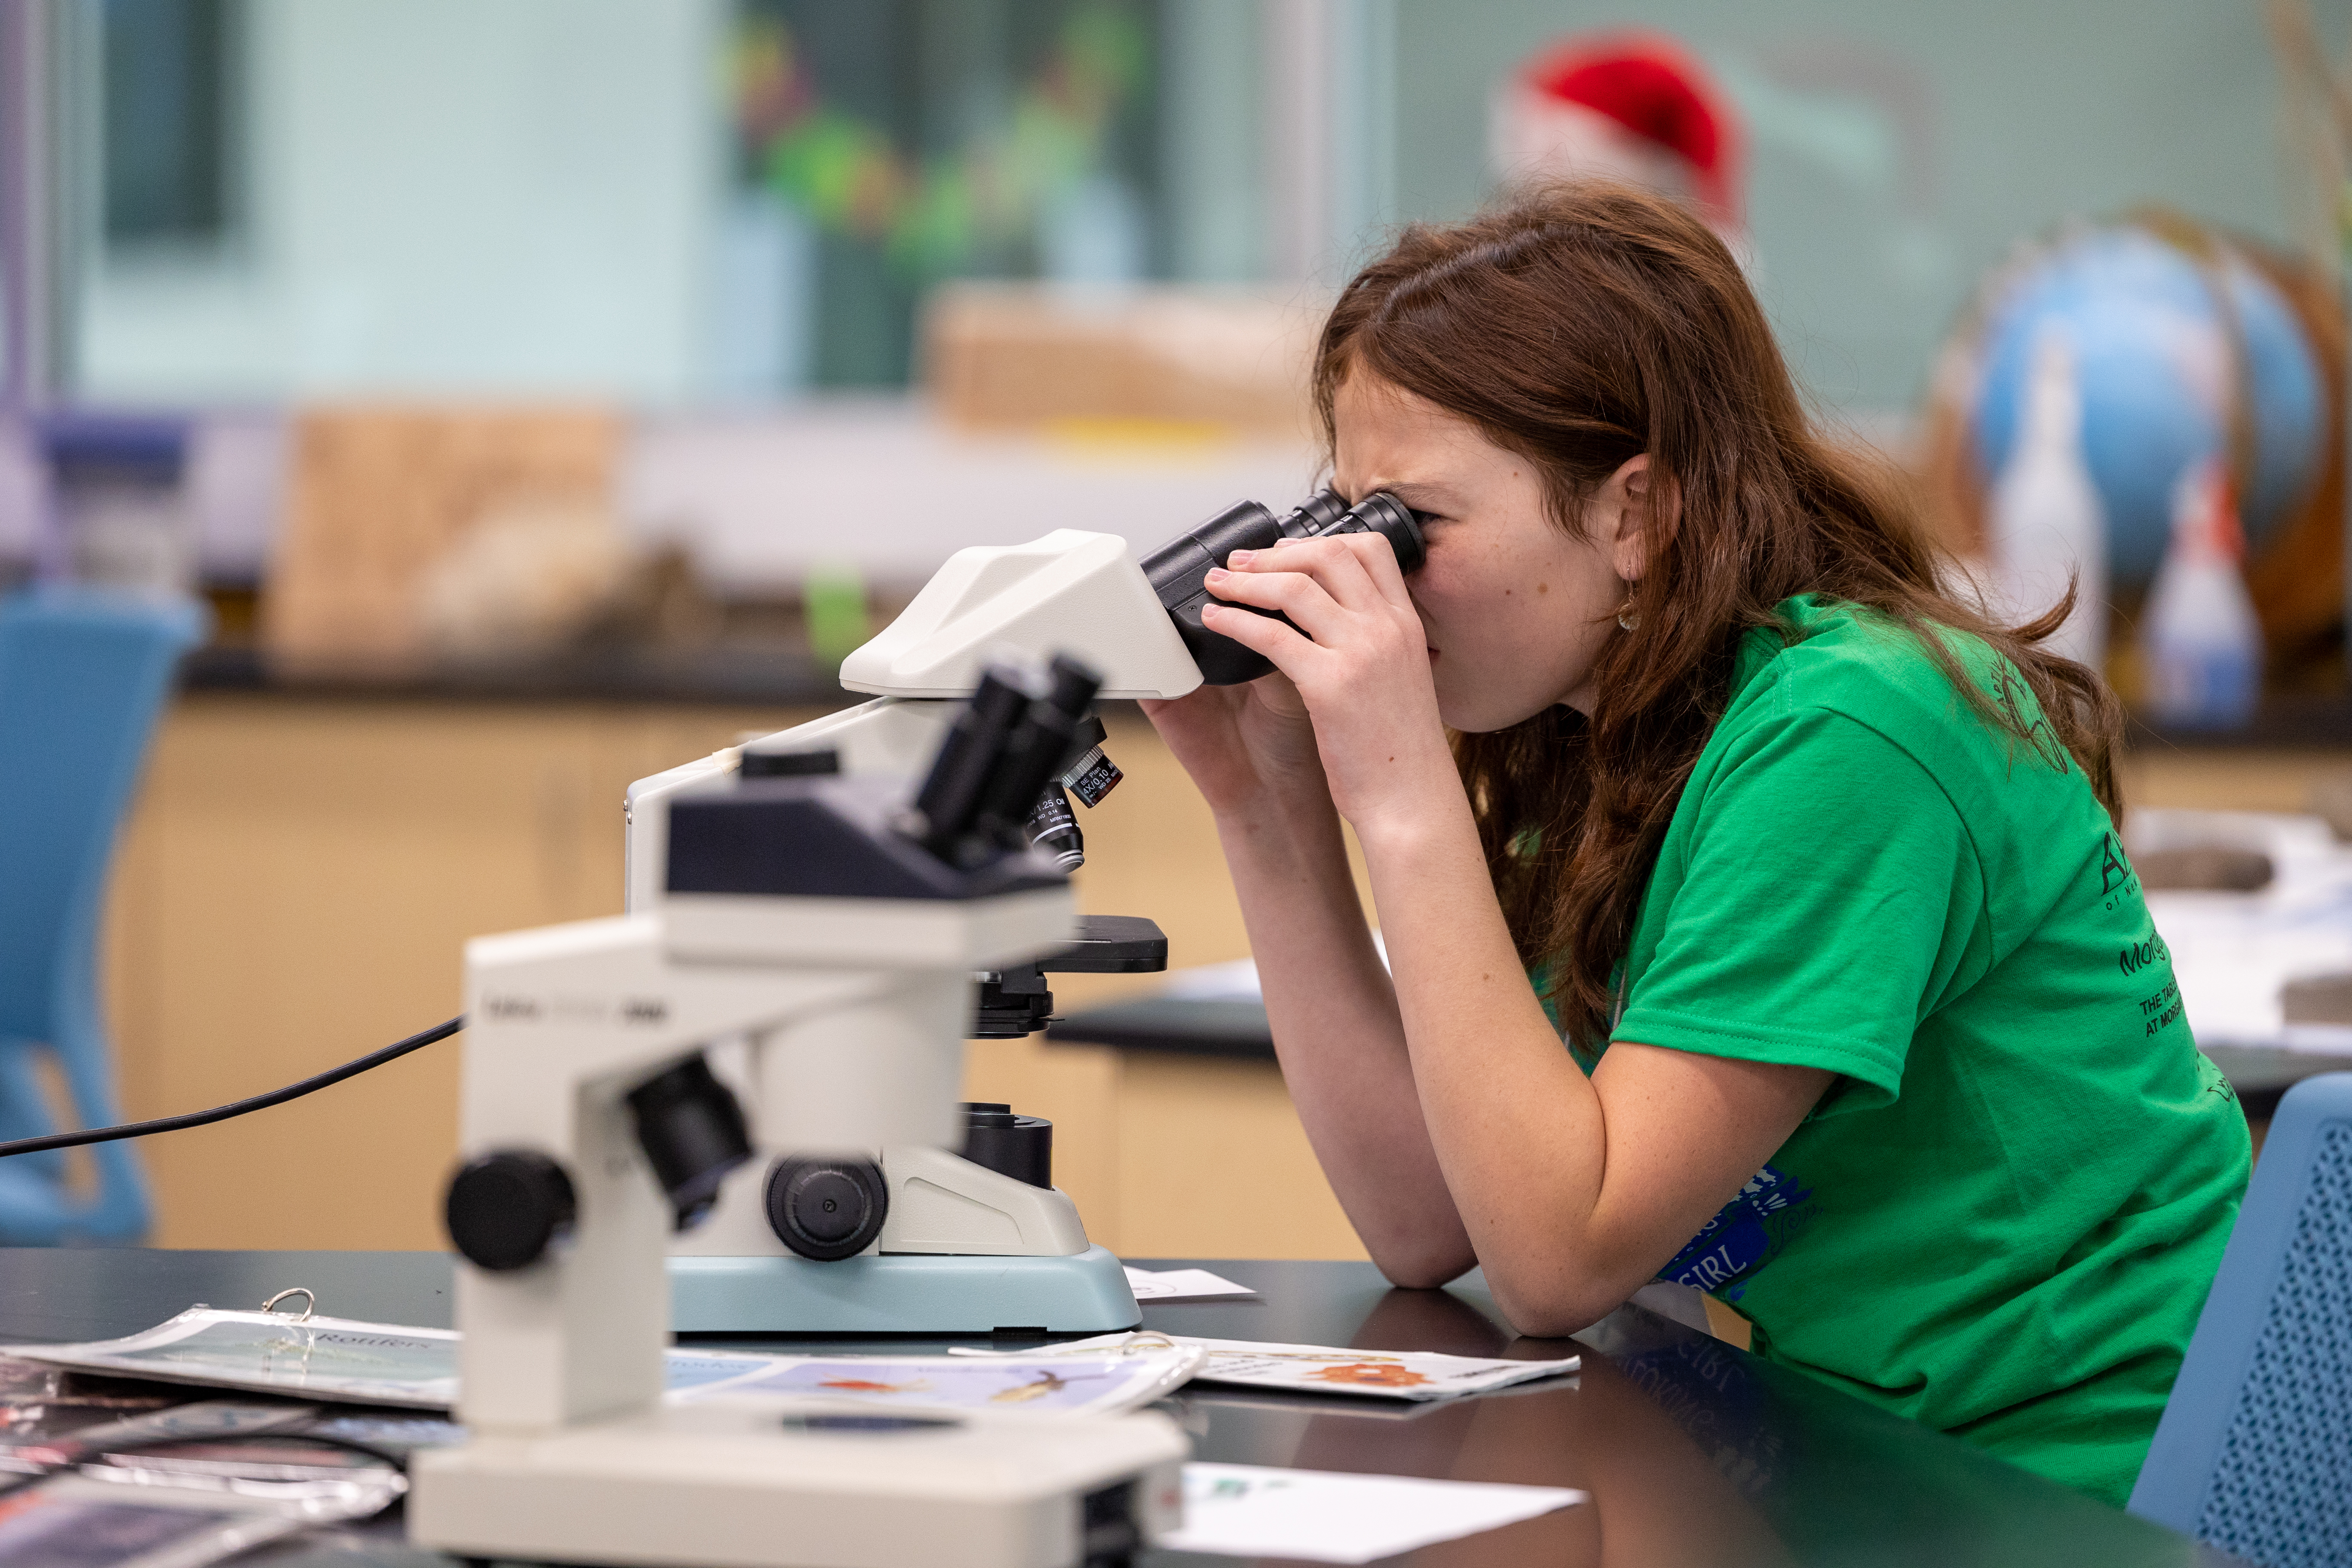 A young teenage girls looks into the eyepieces of a microscope in a labratory